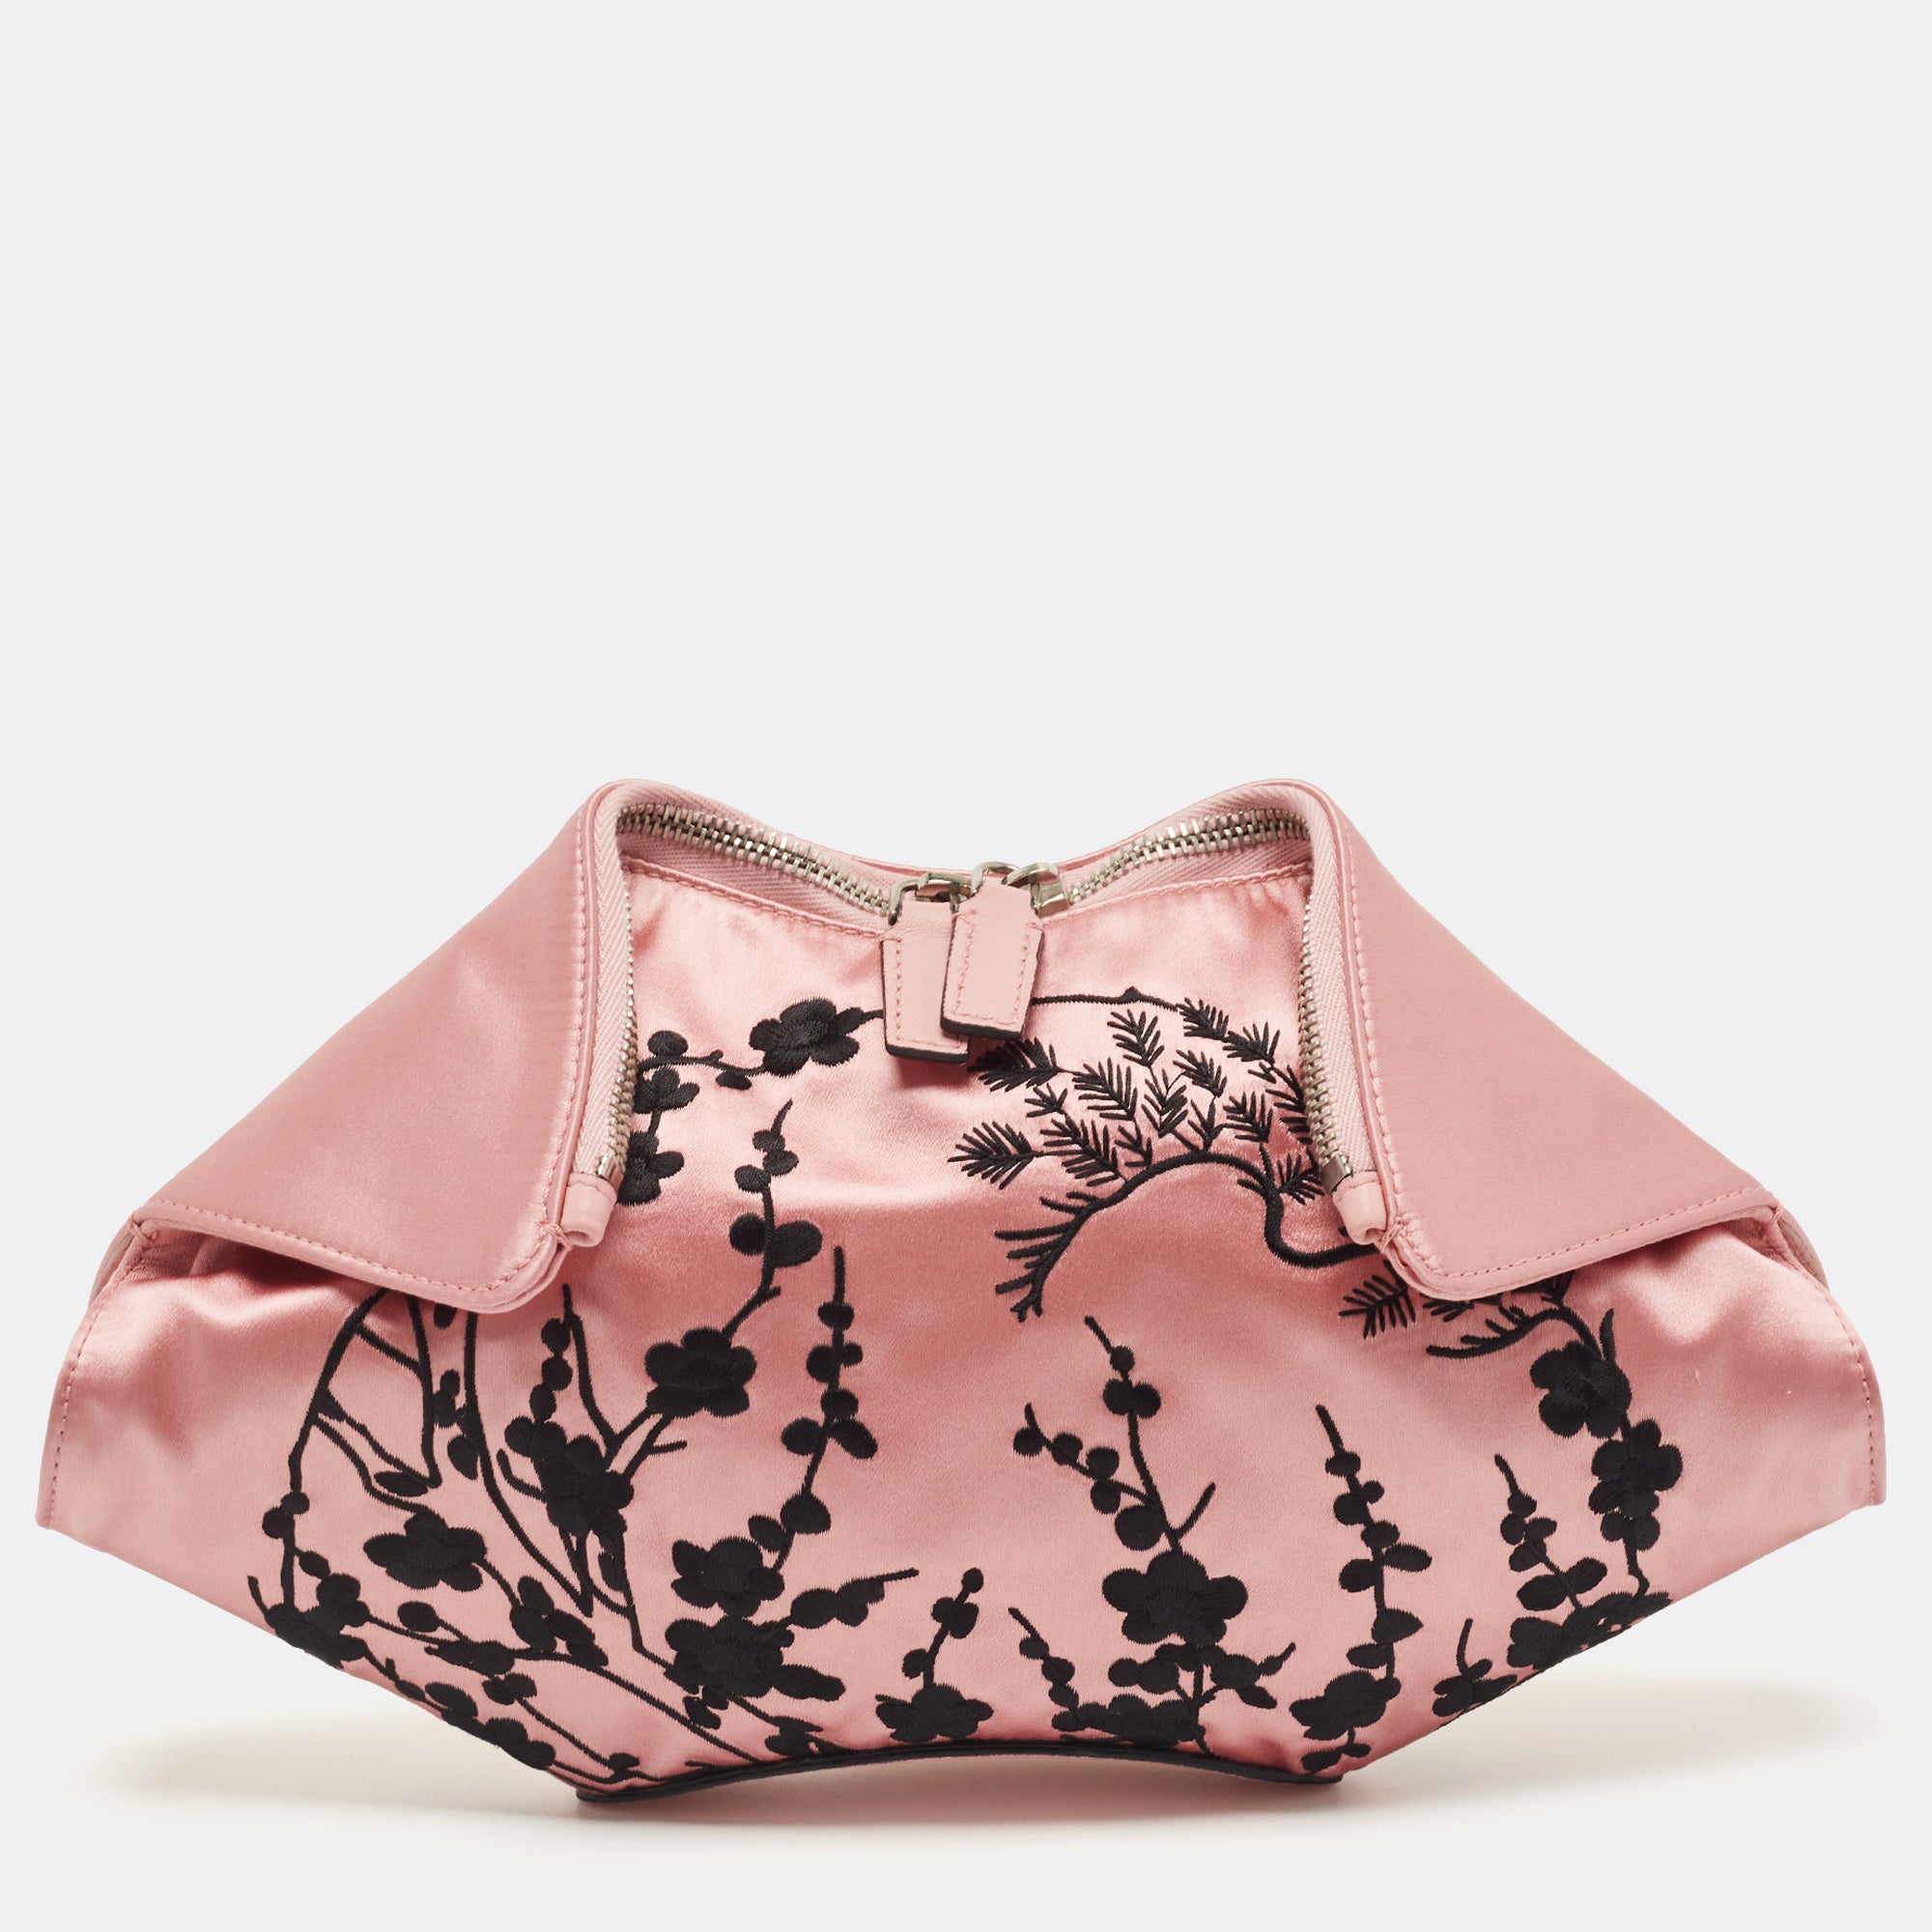 Pink/Black Embroidered Satin And Leather De Manta Clutch